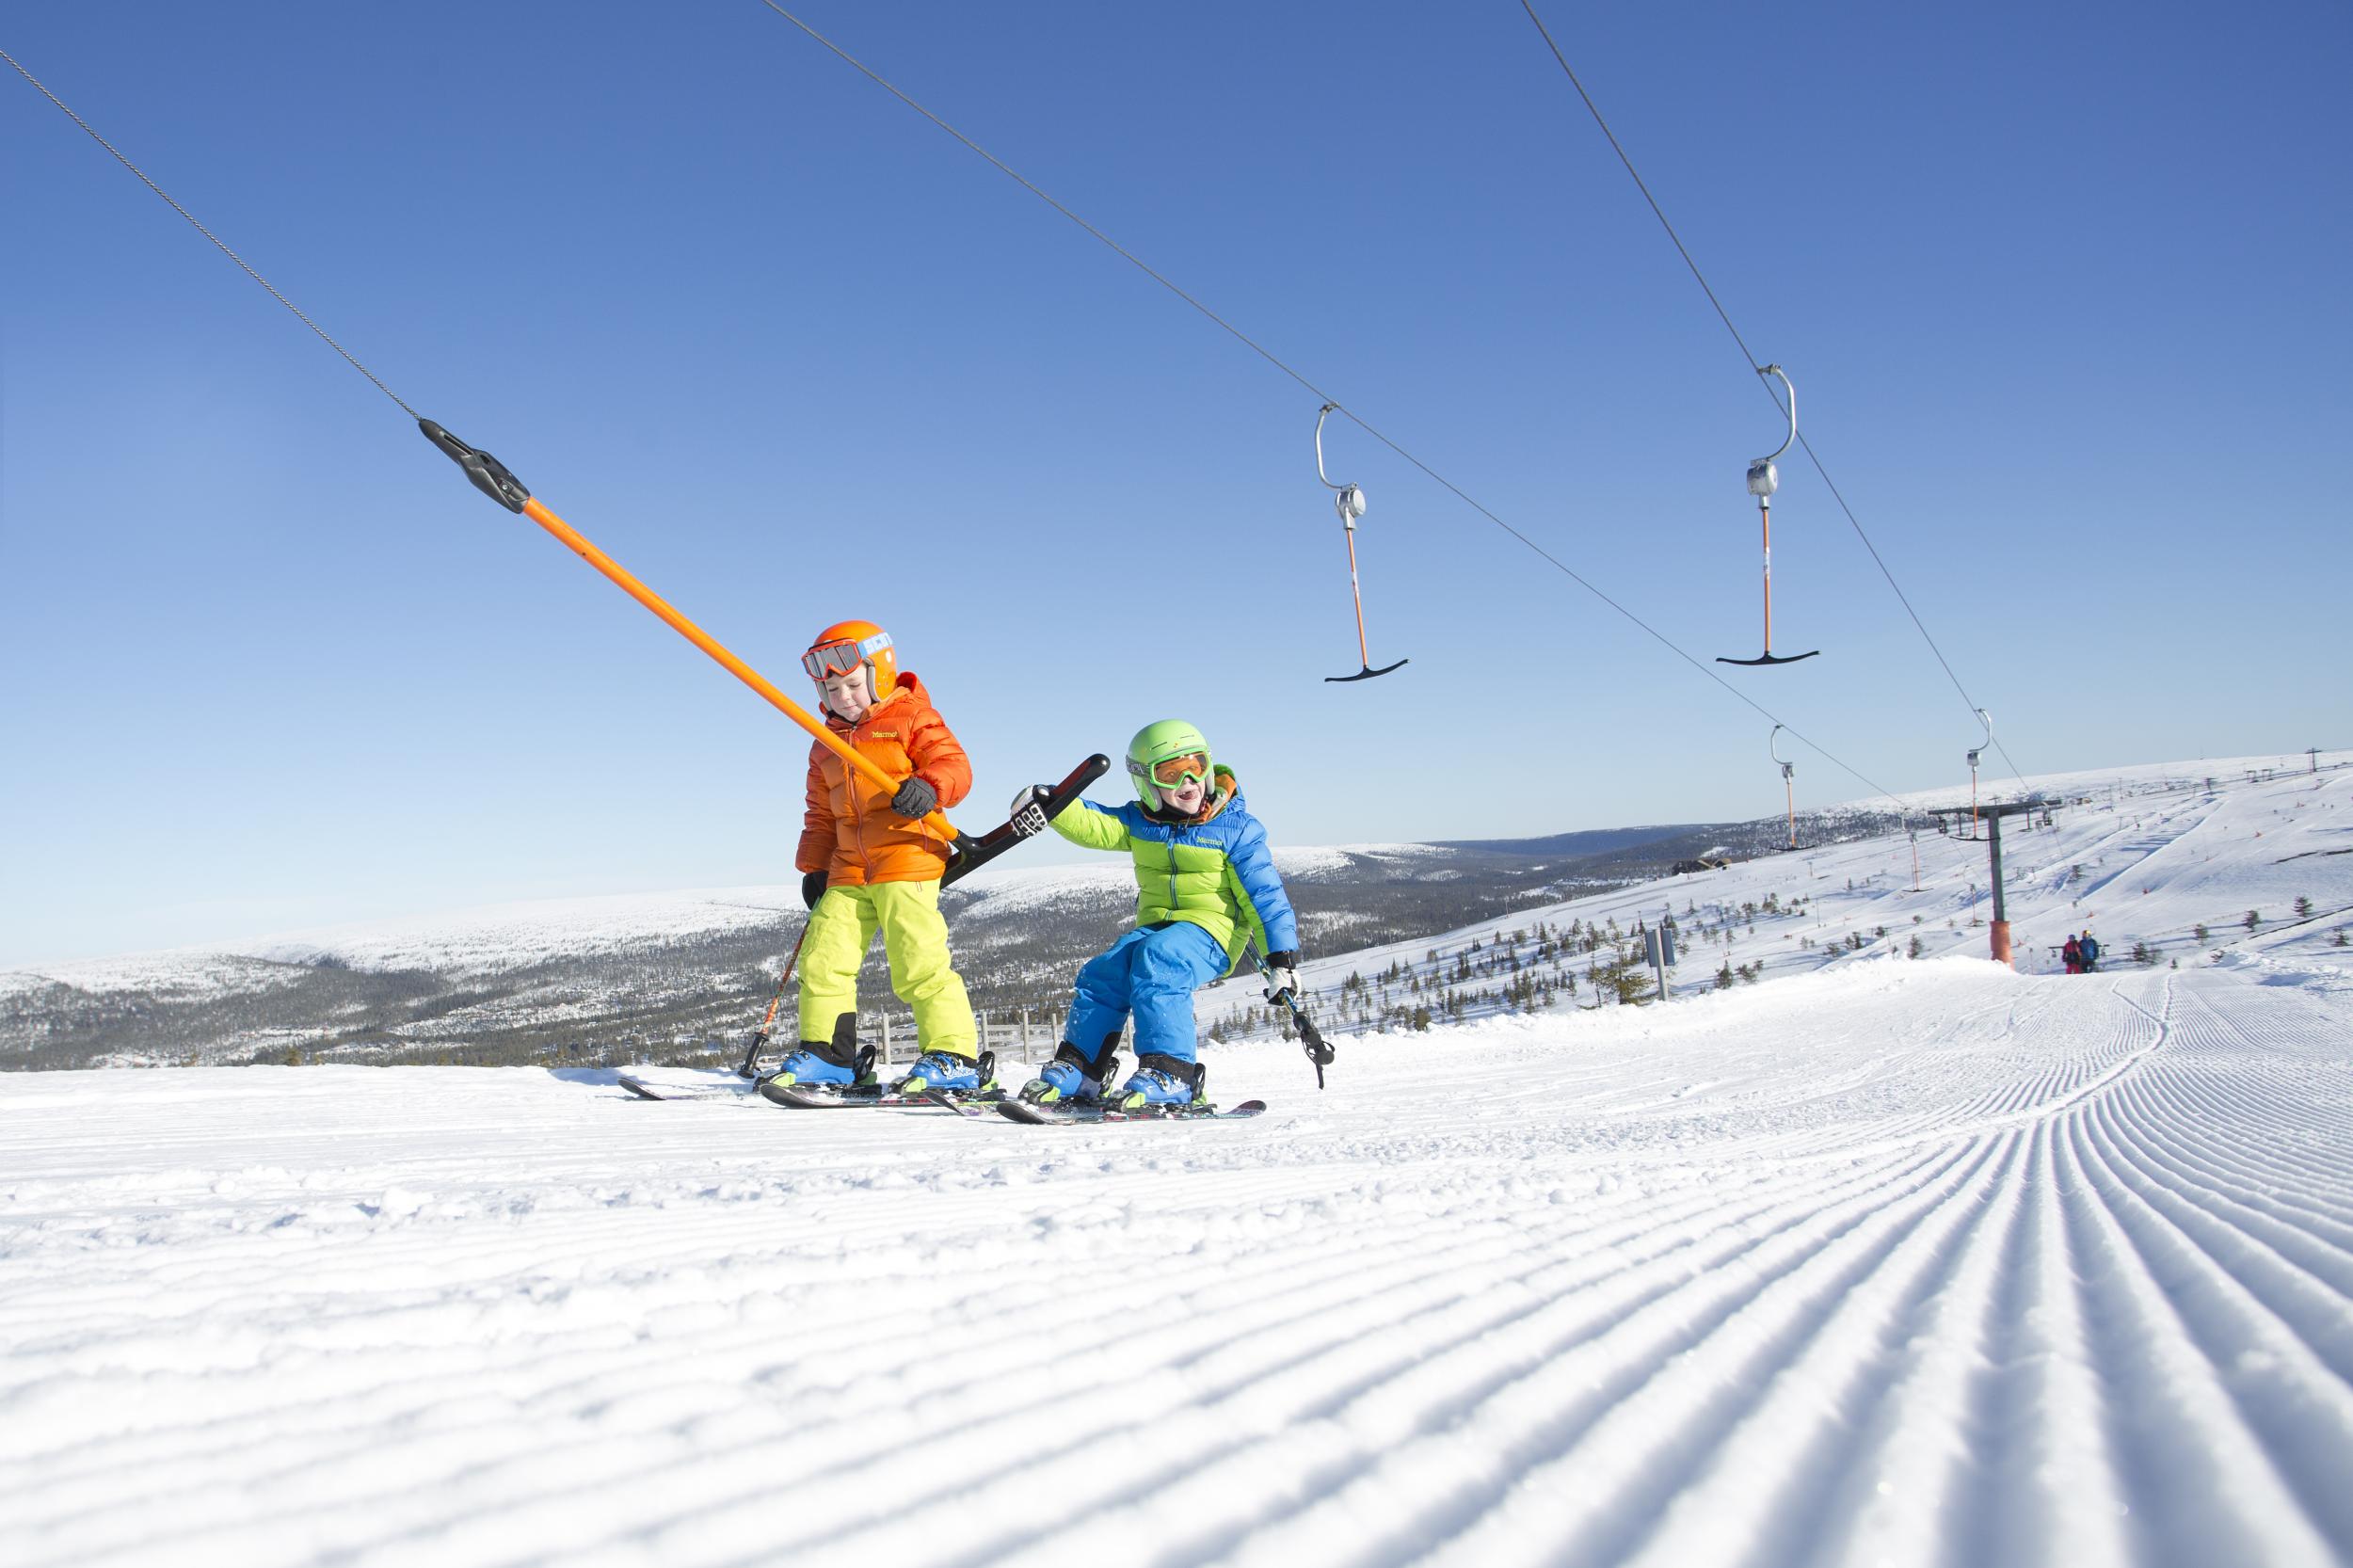 All the family can enjoy a snowsports holiday